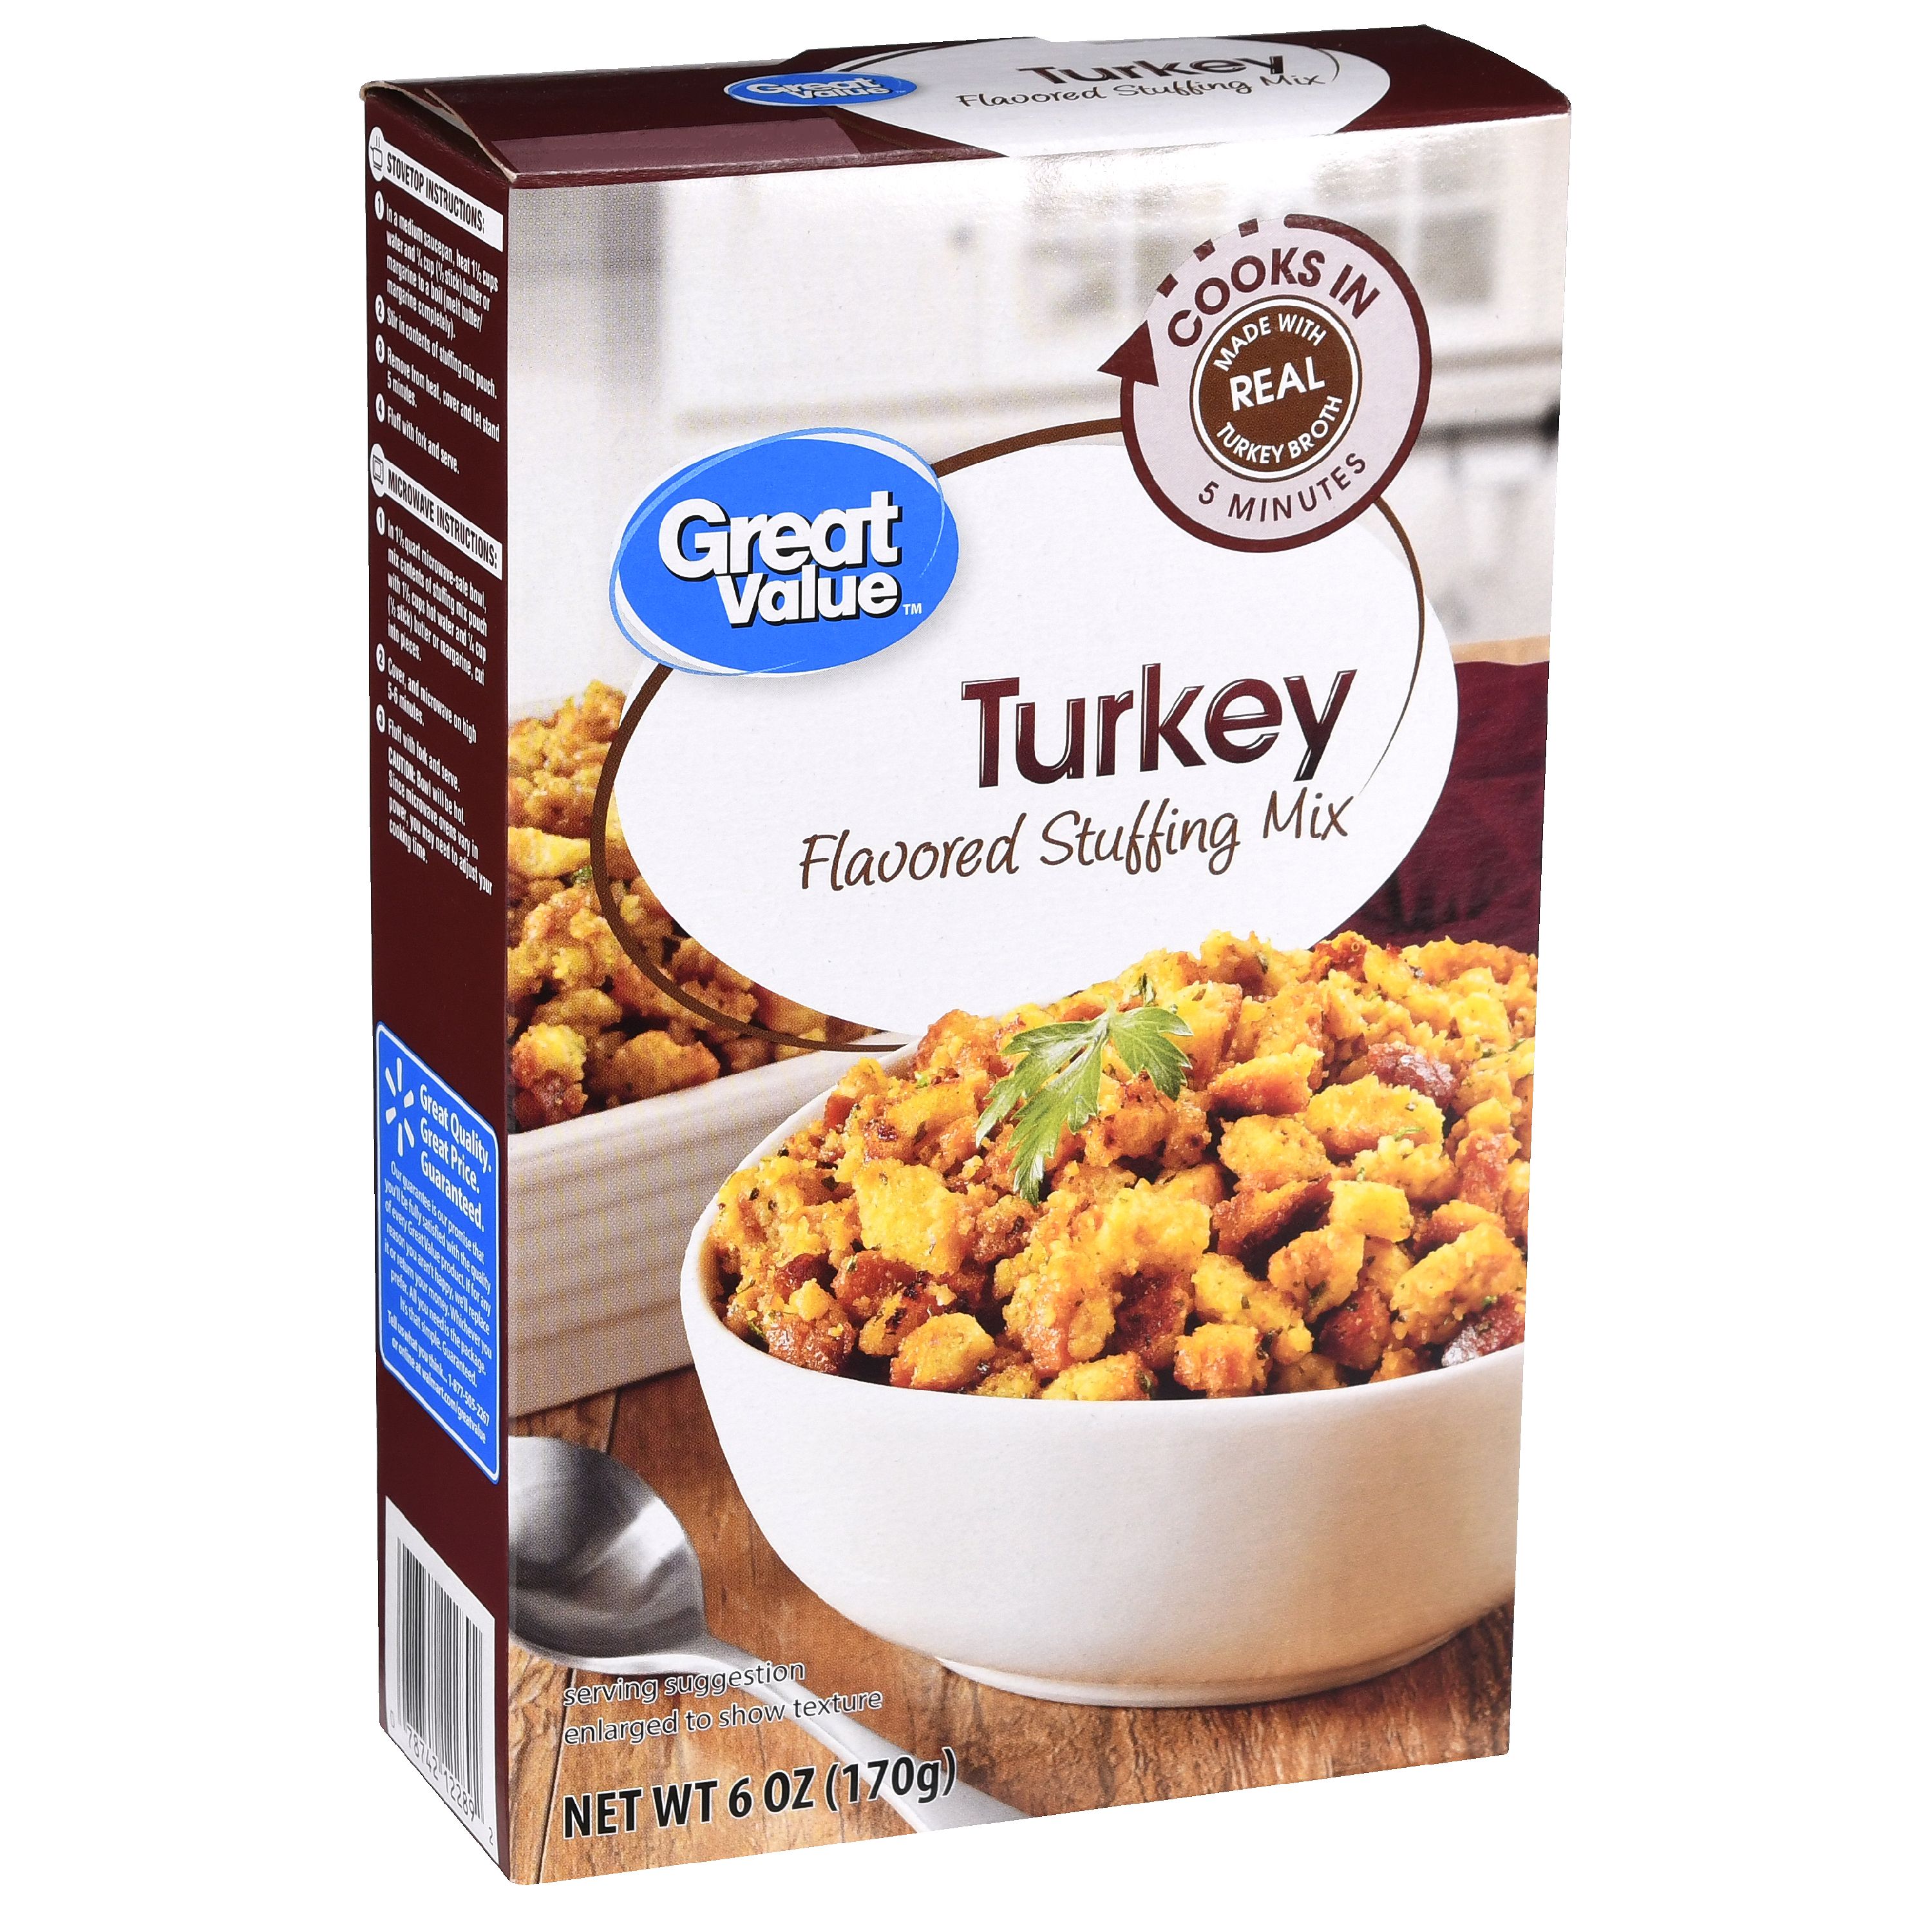 (4 Pack) Great Value Turkey Flavored Stuffing Mix, 6 Oz